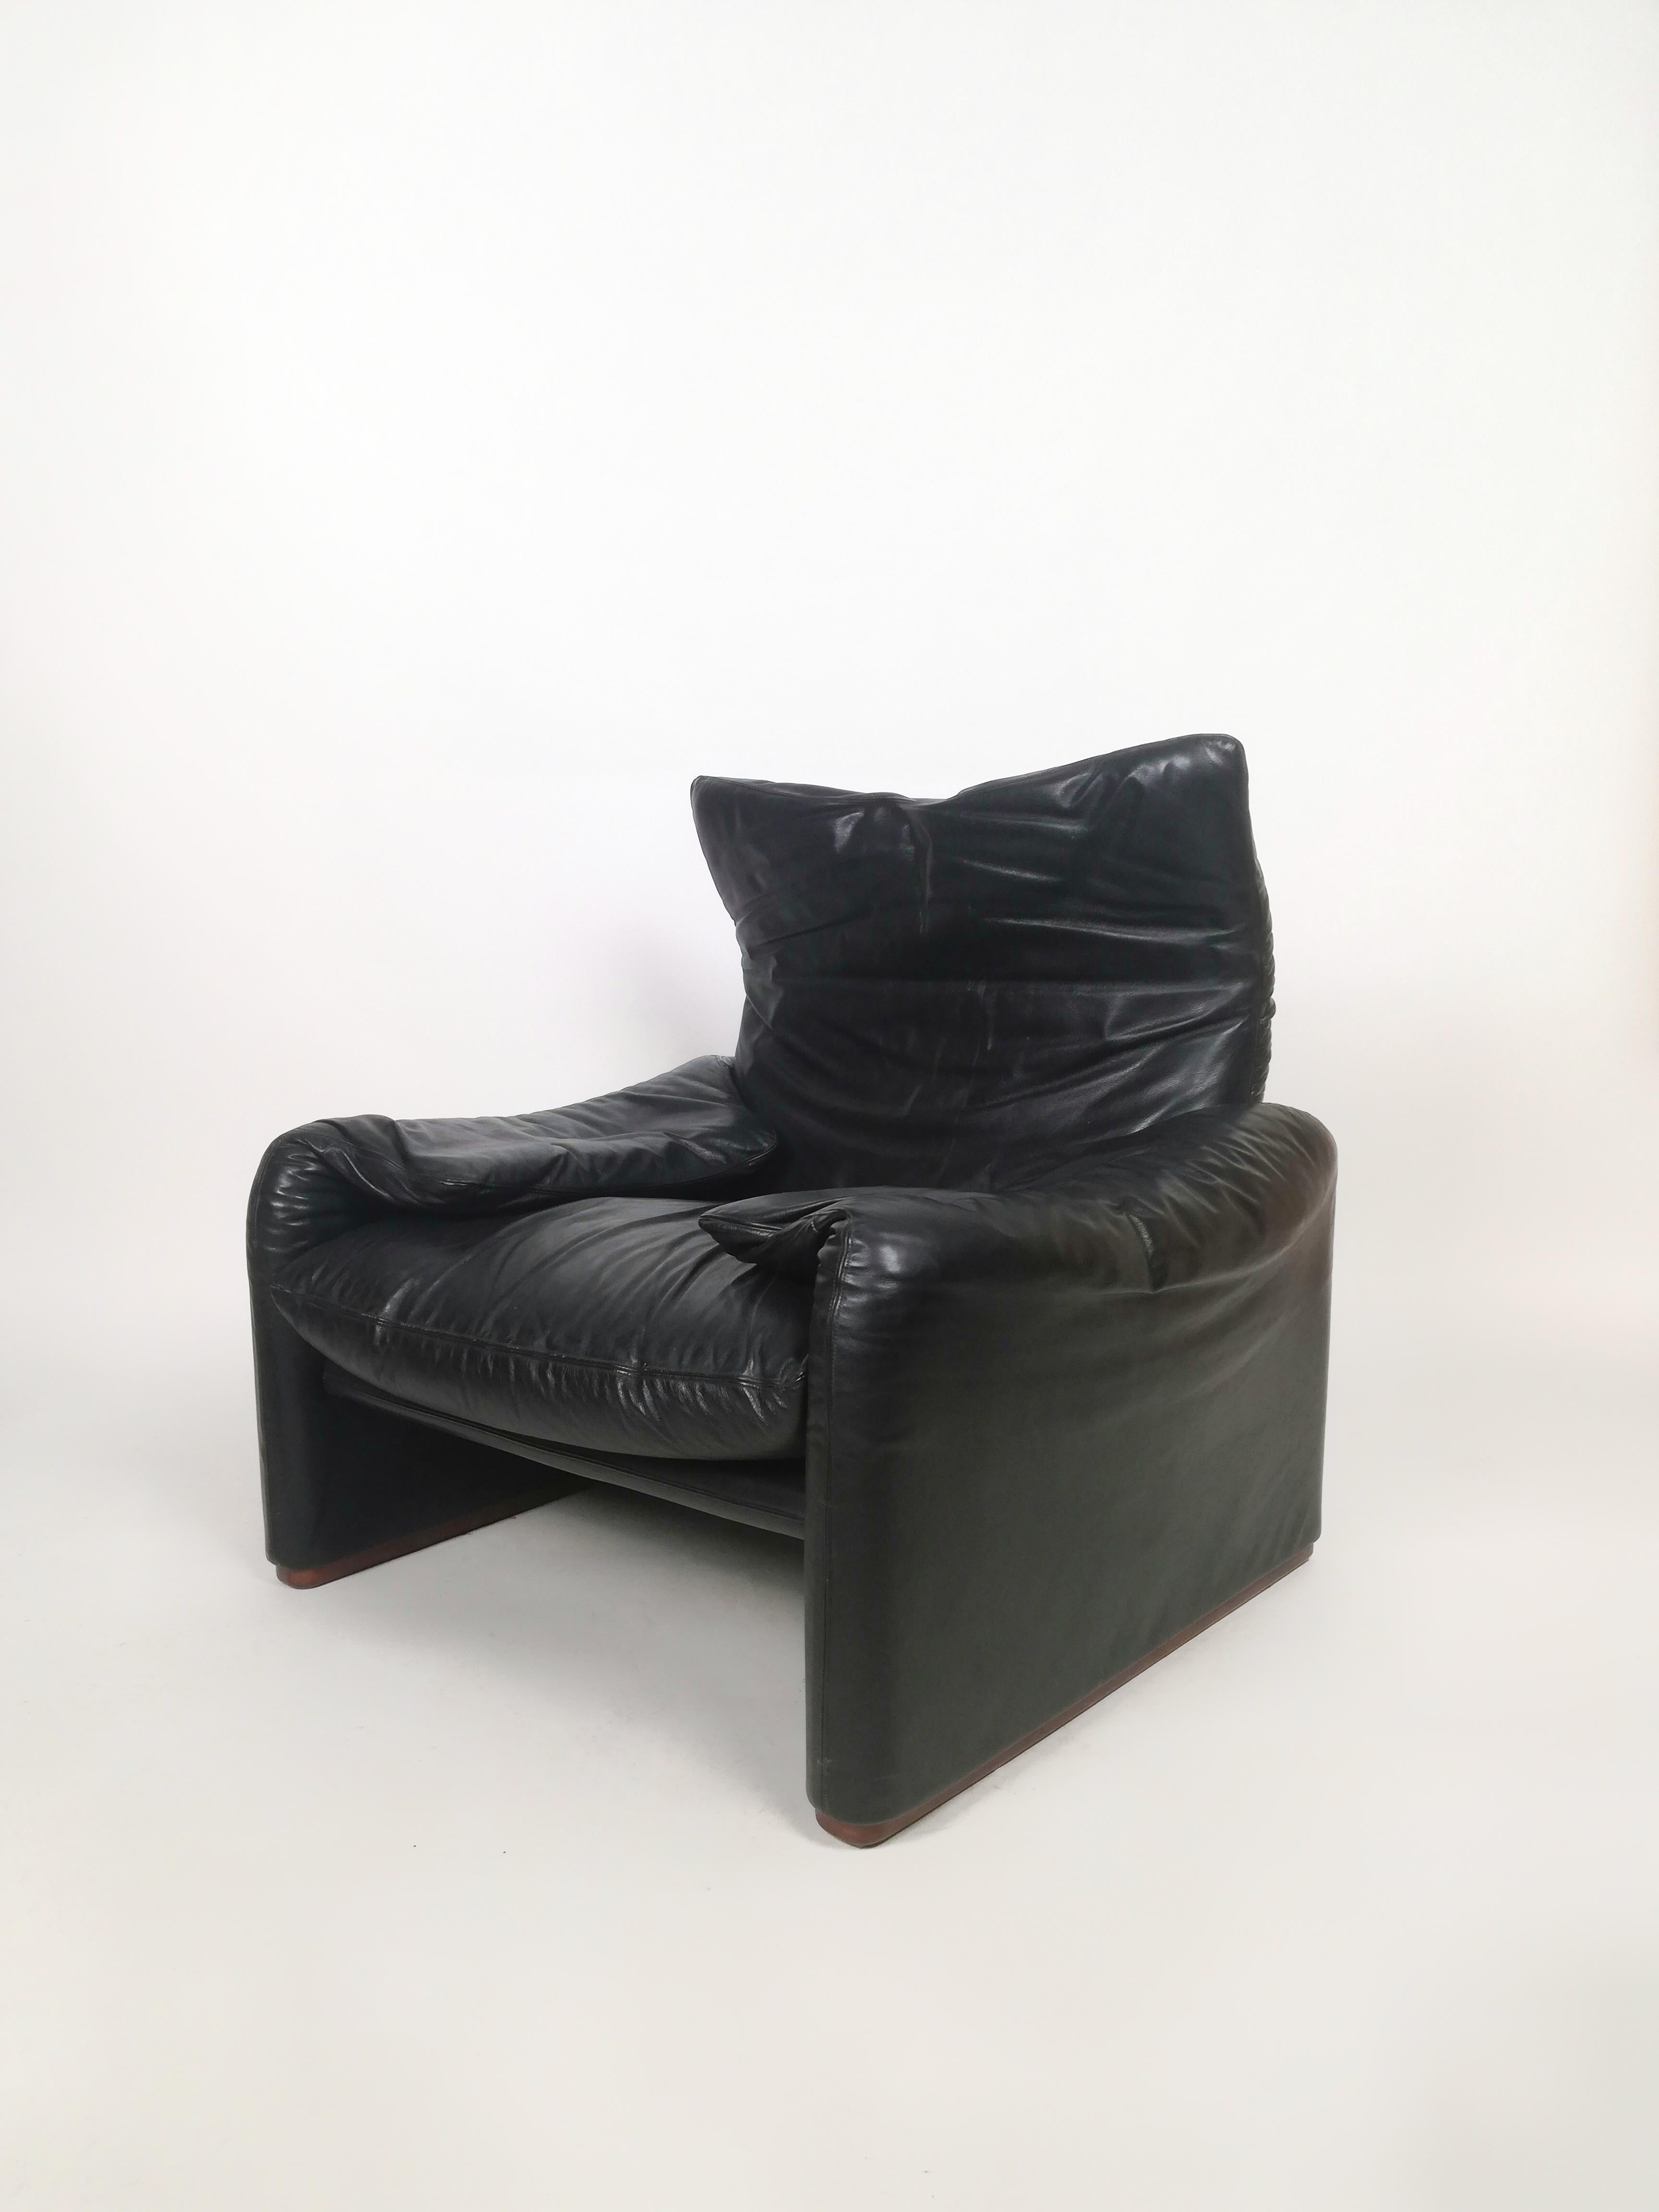 Set of Two Maralunga Black Leather Armchairs by Vico Magistretti In Good Condition For Sale In Roma, IT